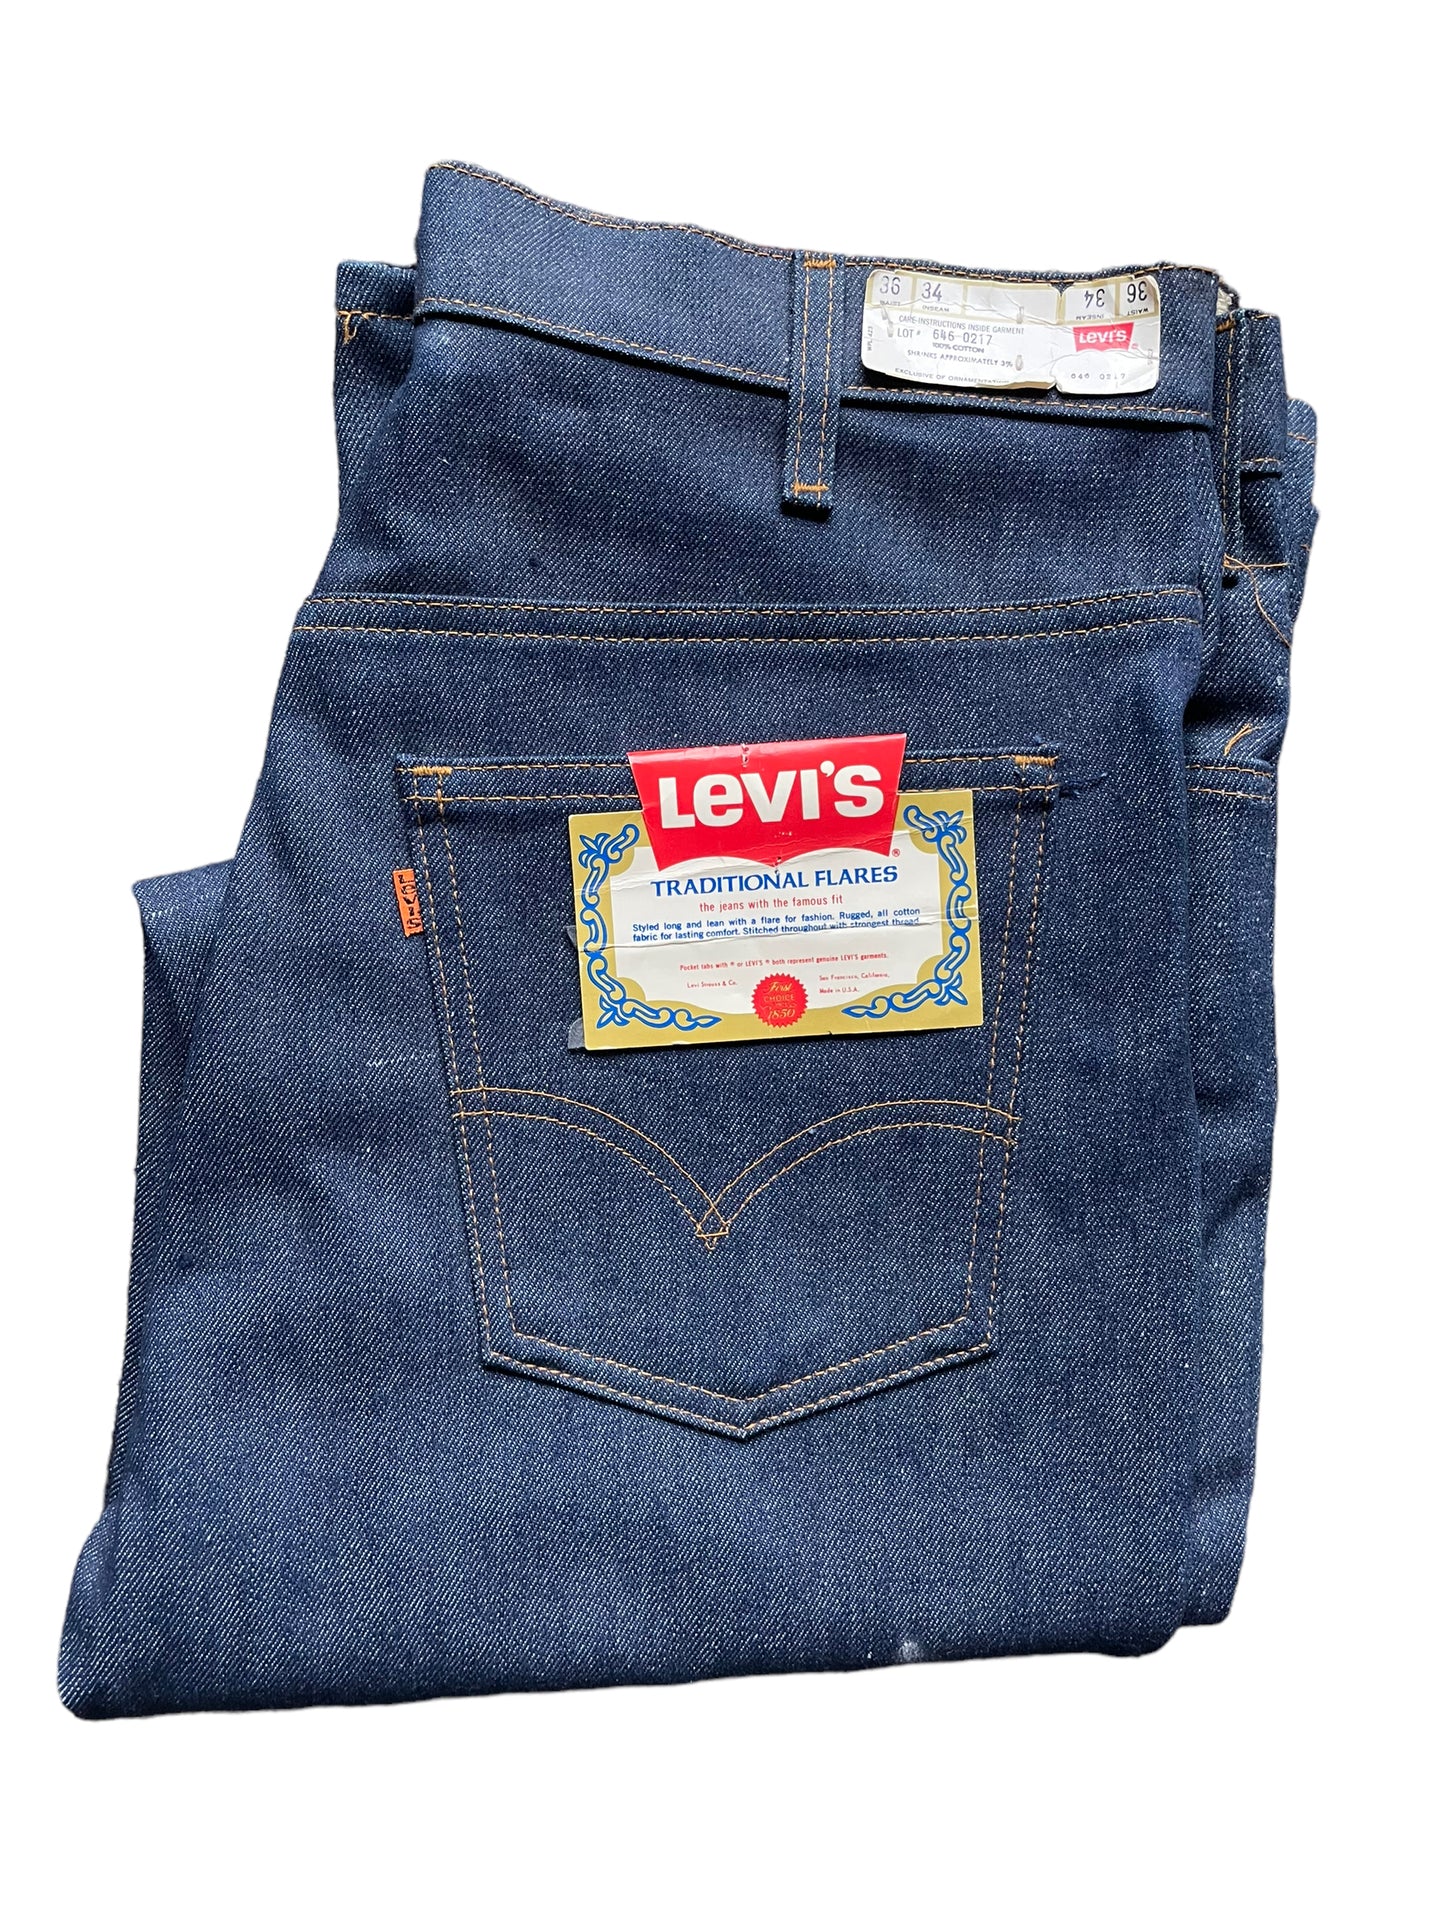 Folded view of Vintage 80s Levi's 646 Flares | Seattle Deadstock Levi's | Barn Owl Vintage